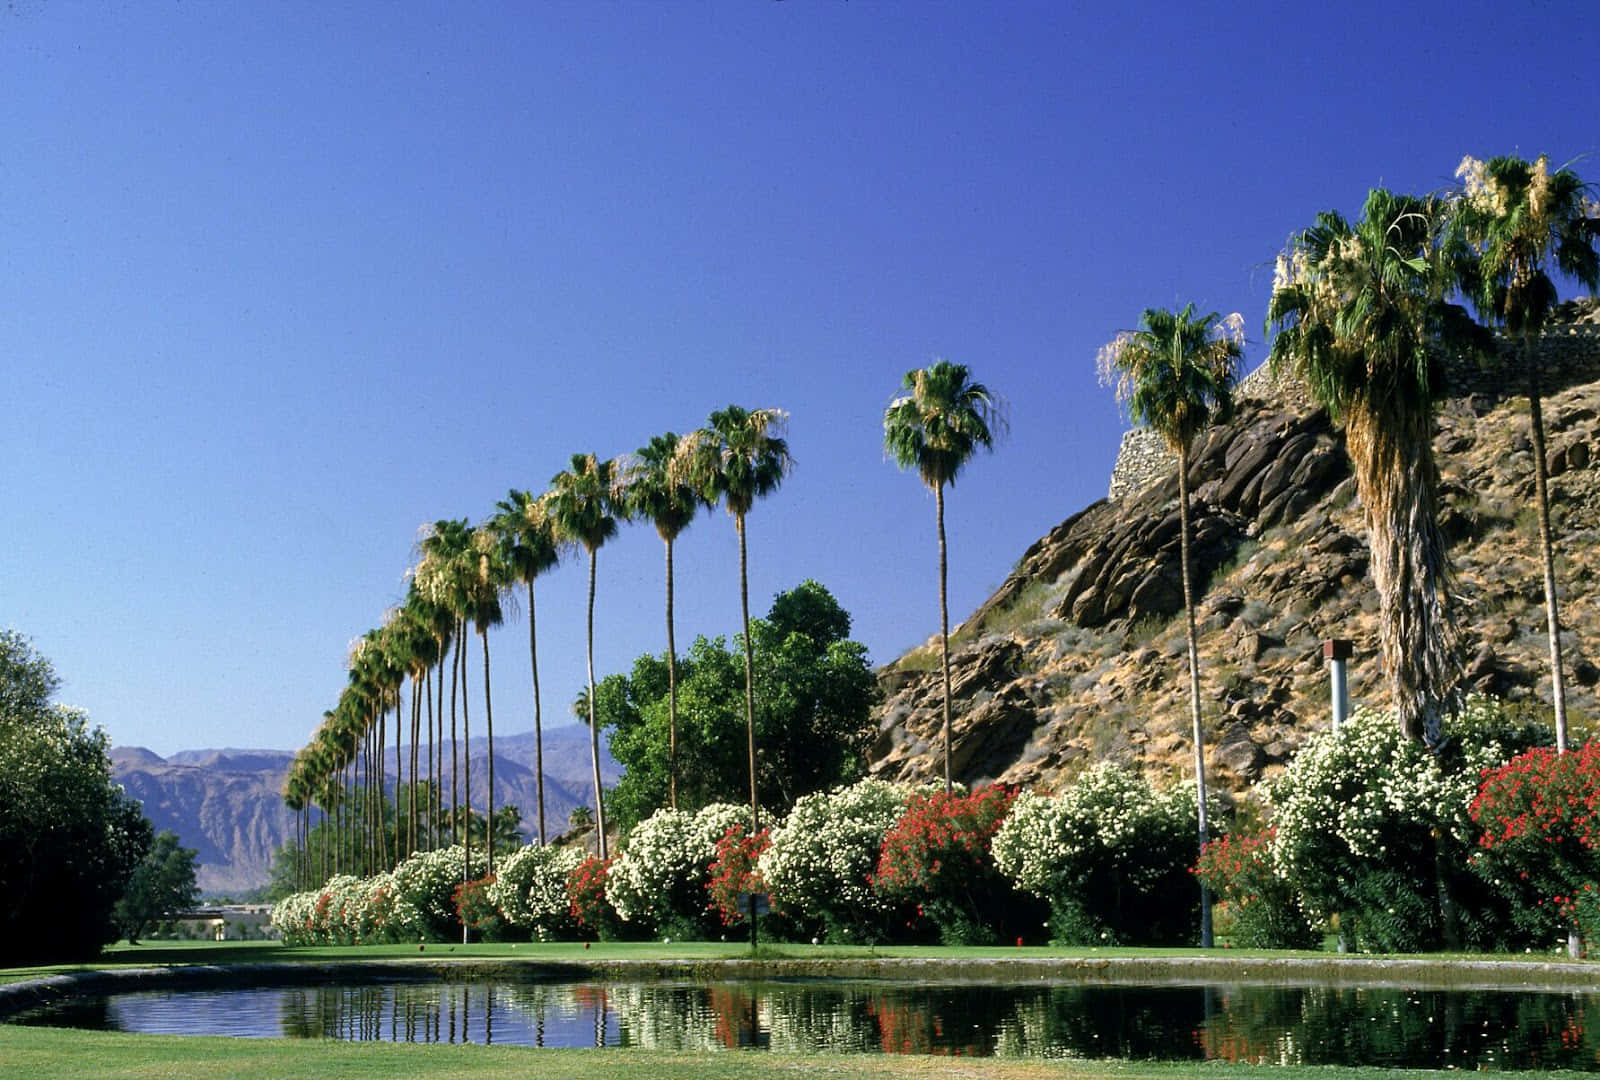 Palmsprings O'donnell Golf Club: Palm Springs O'donnell Golf Club. Wallpaper